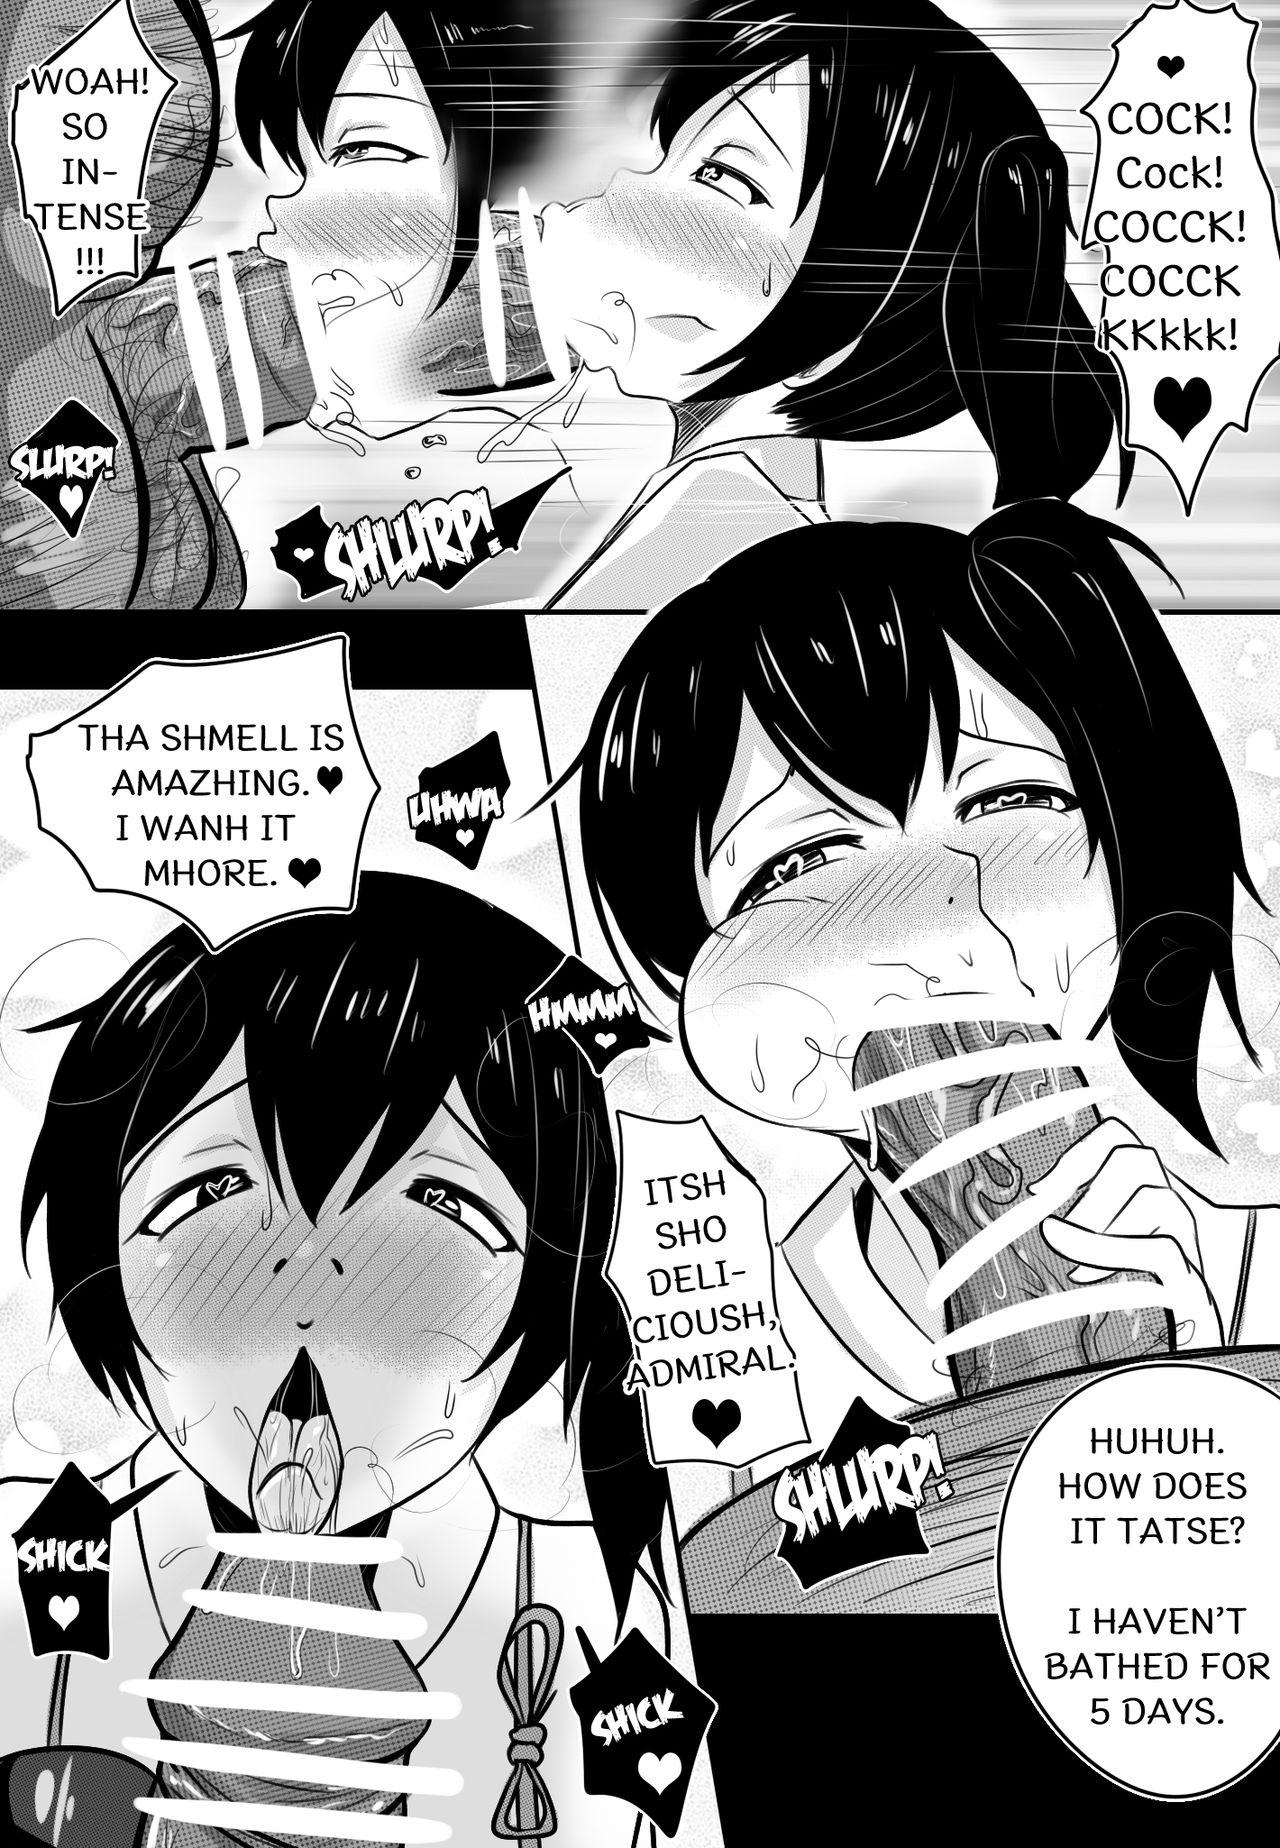 Lovers My Onahole 1 - Kantai collection Thuylinh - Page 5